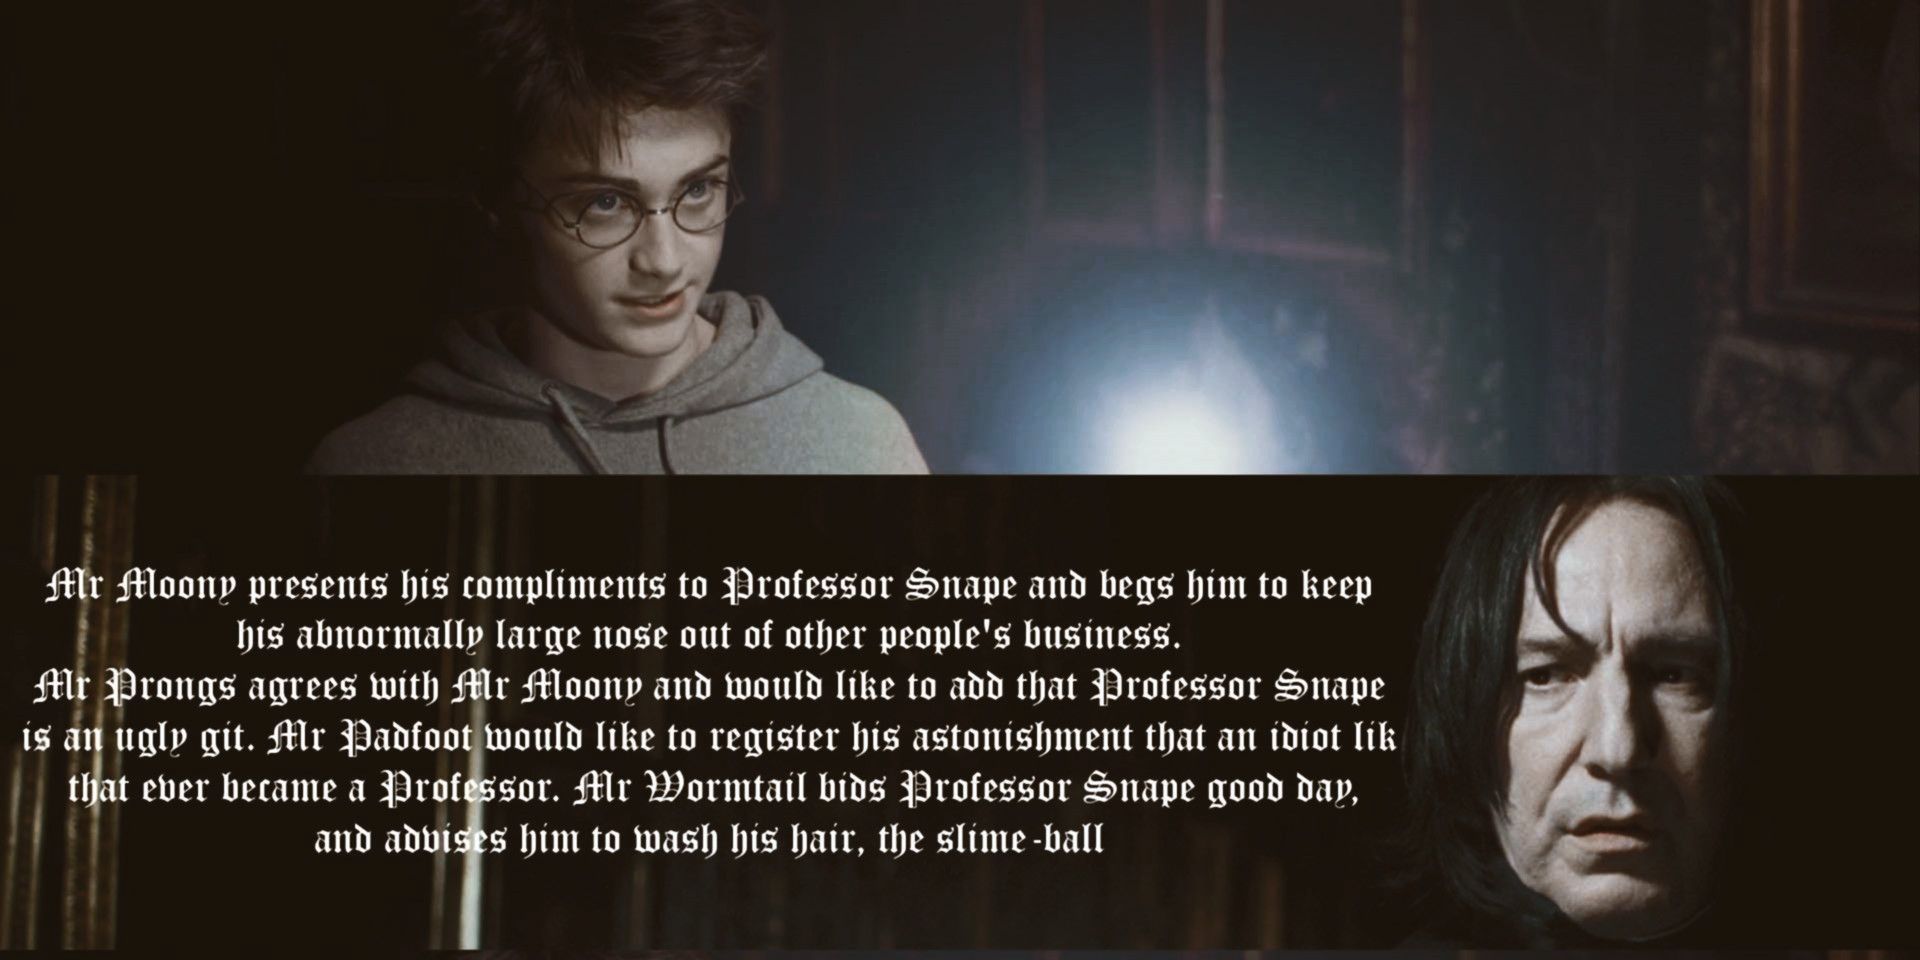 Lupin's insult to Snape via the Marauder's Map